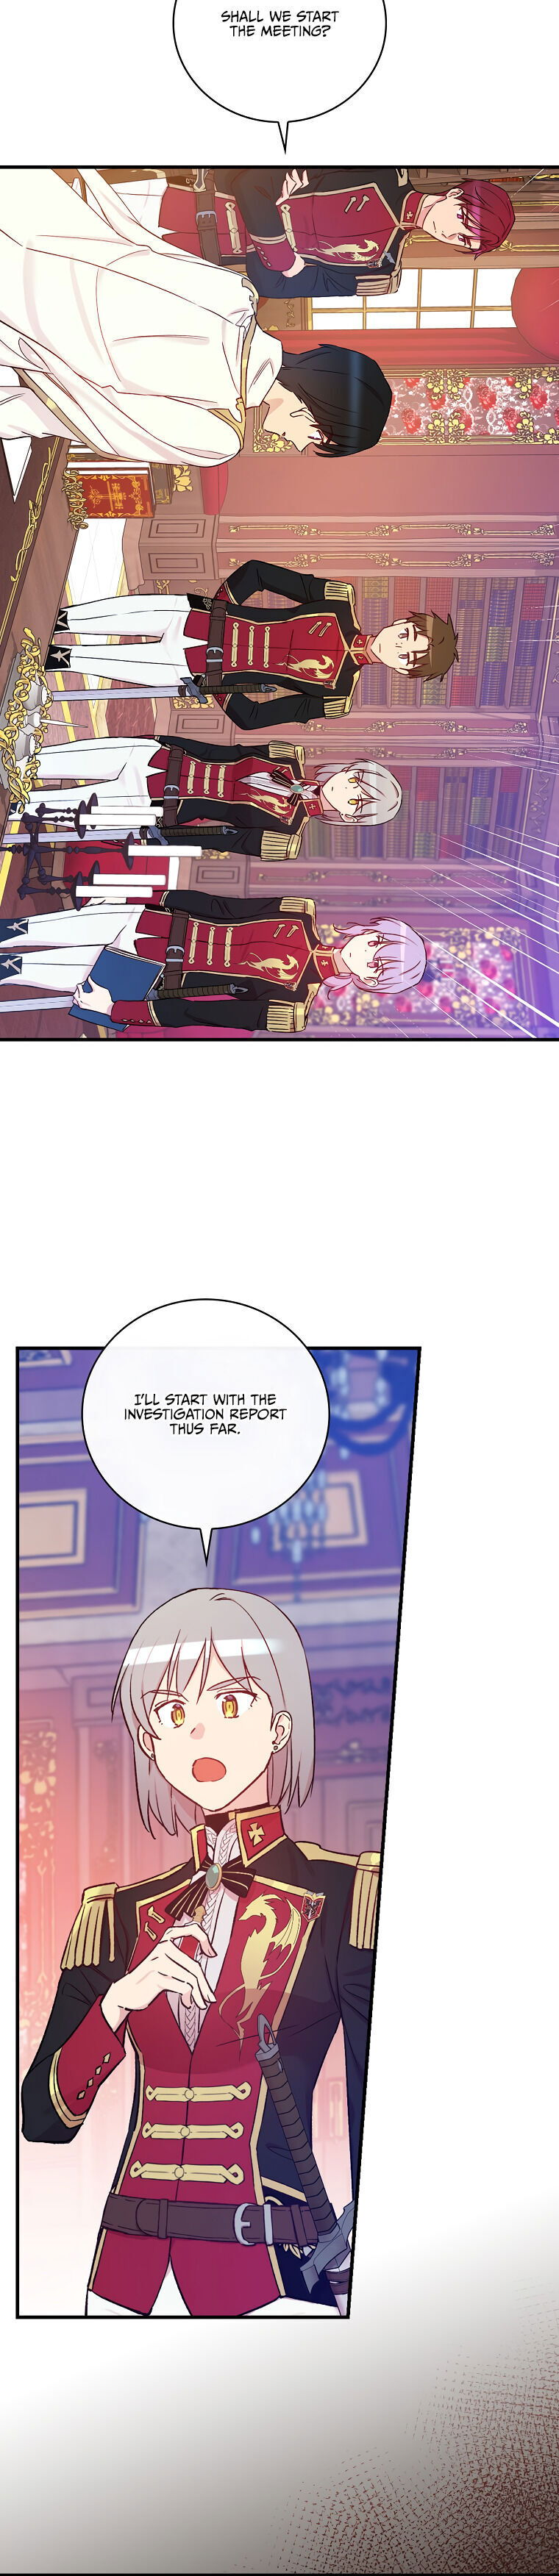 a-red-knight-does-not-blindly-follow-money-chap-39-9